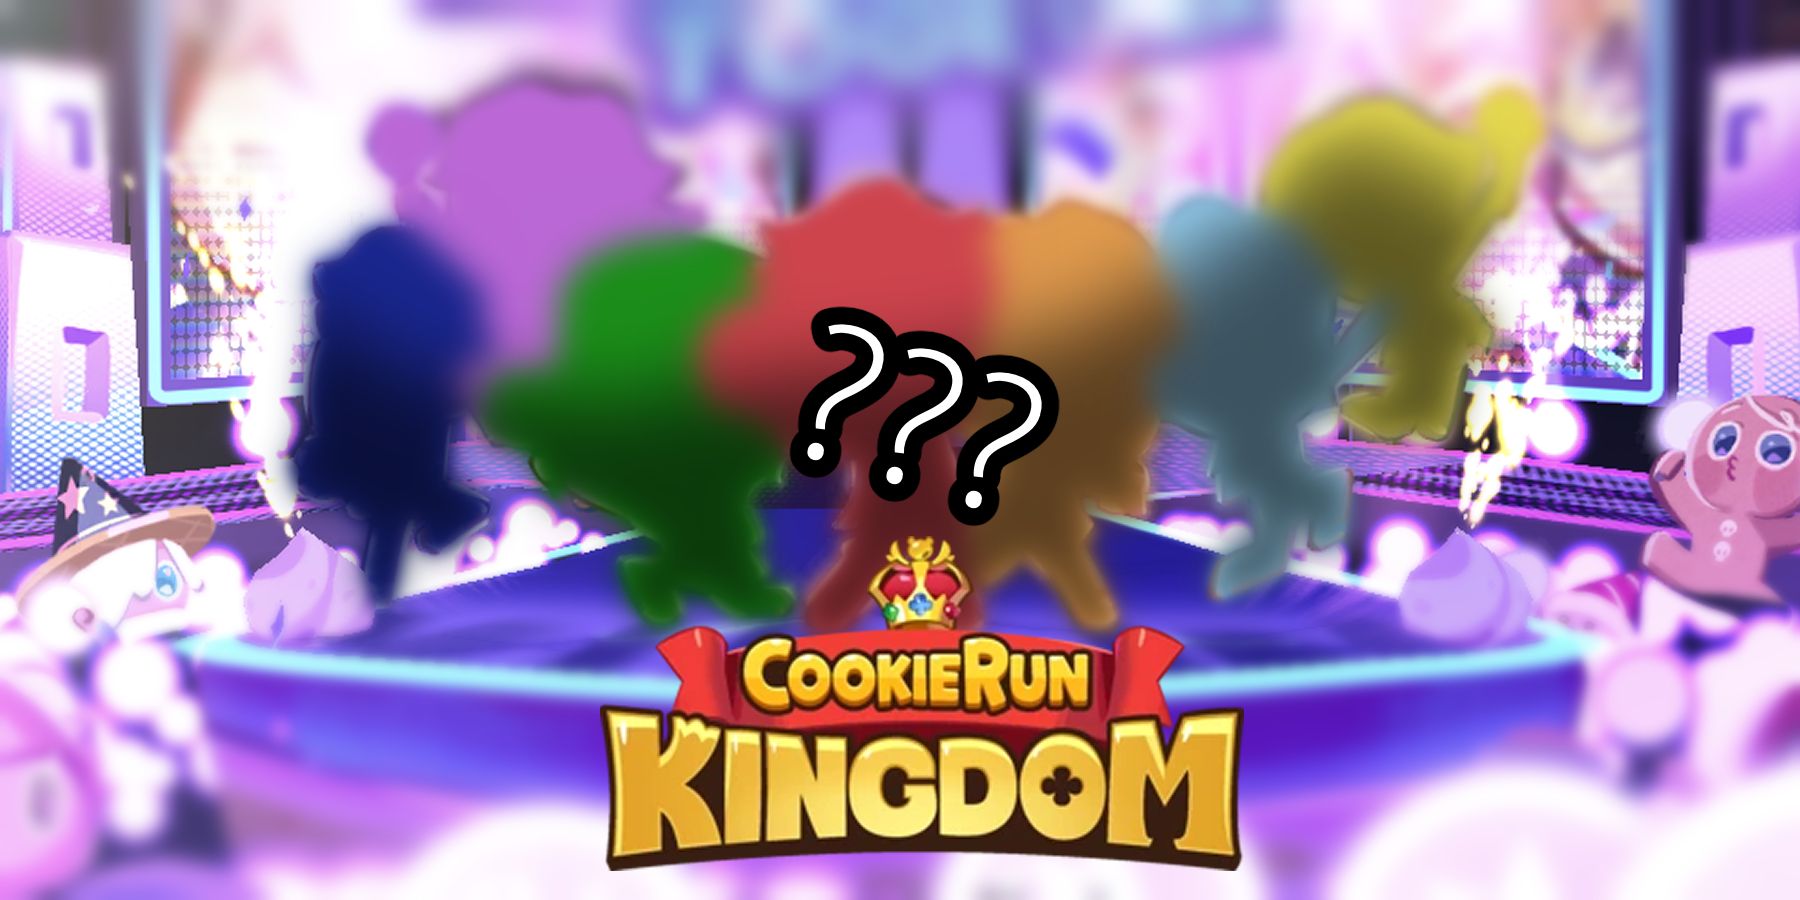 cookie-run-kingdom-bts-cookie-silhouettes-with-logo